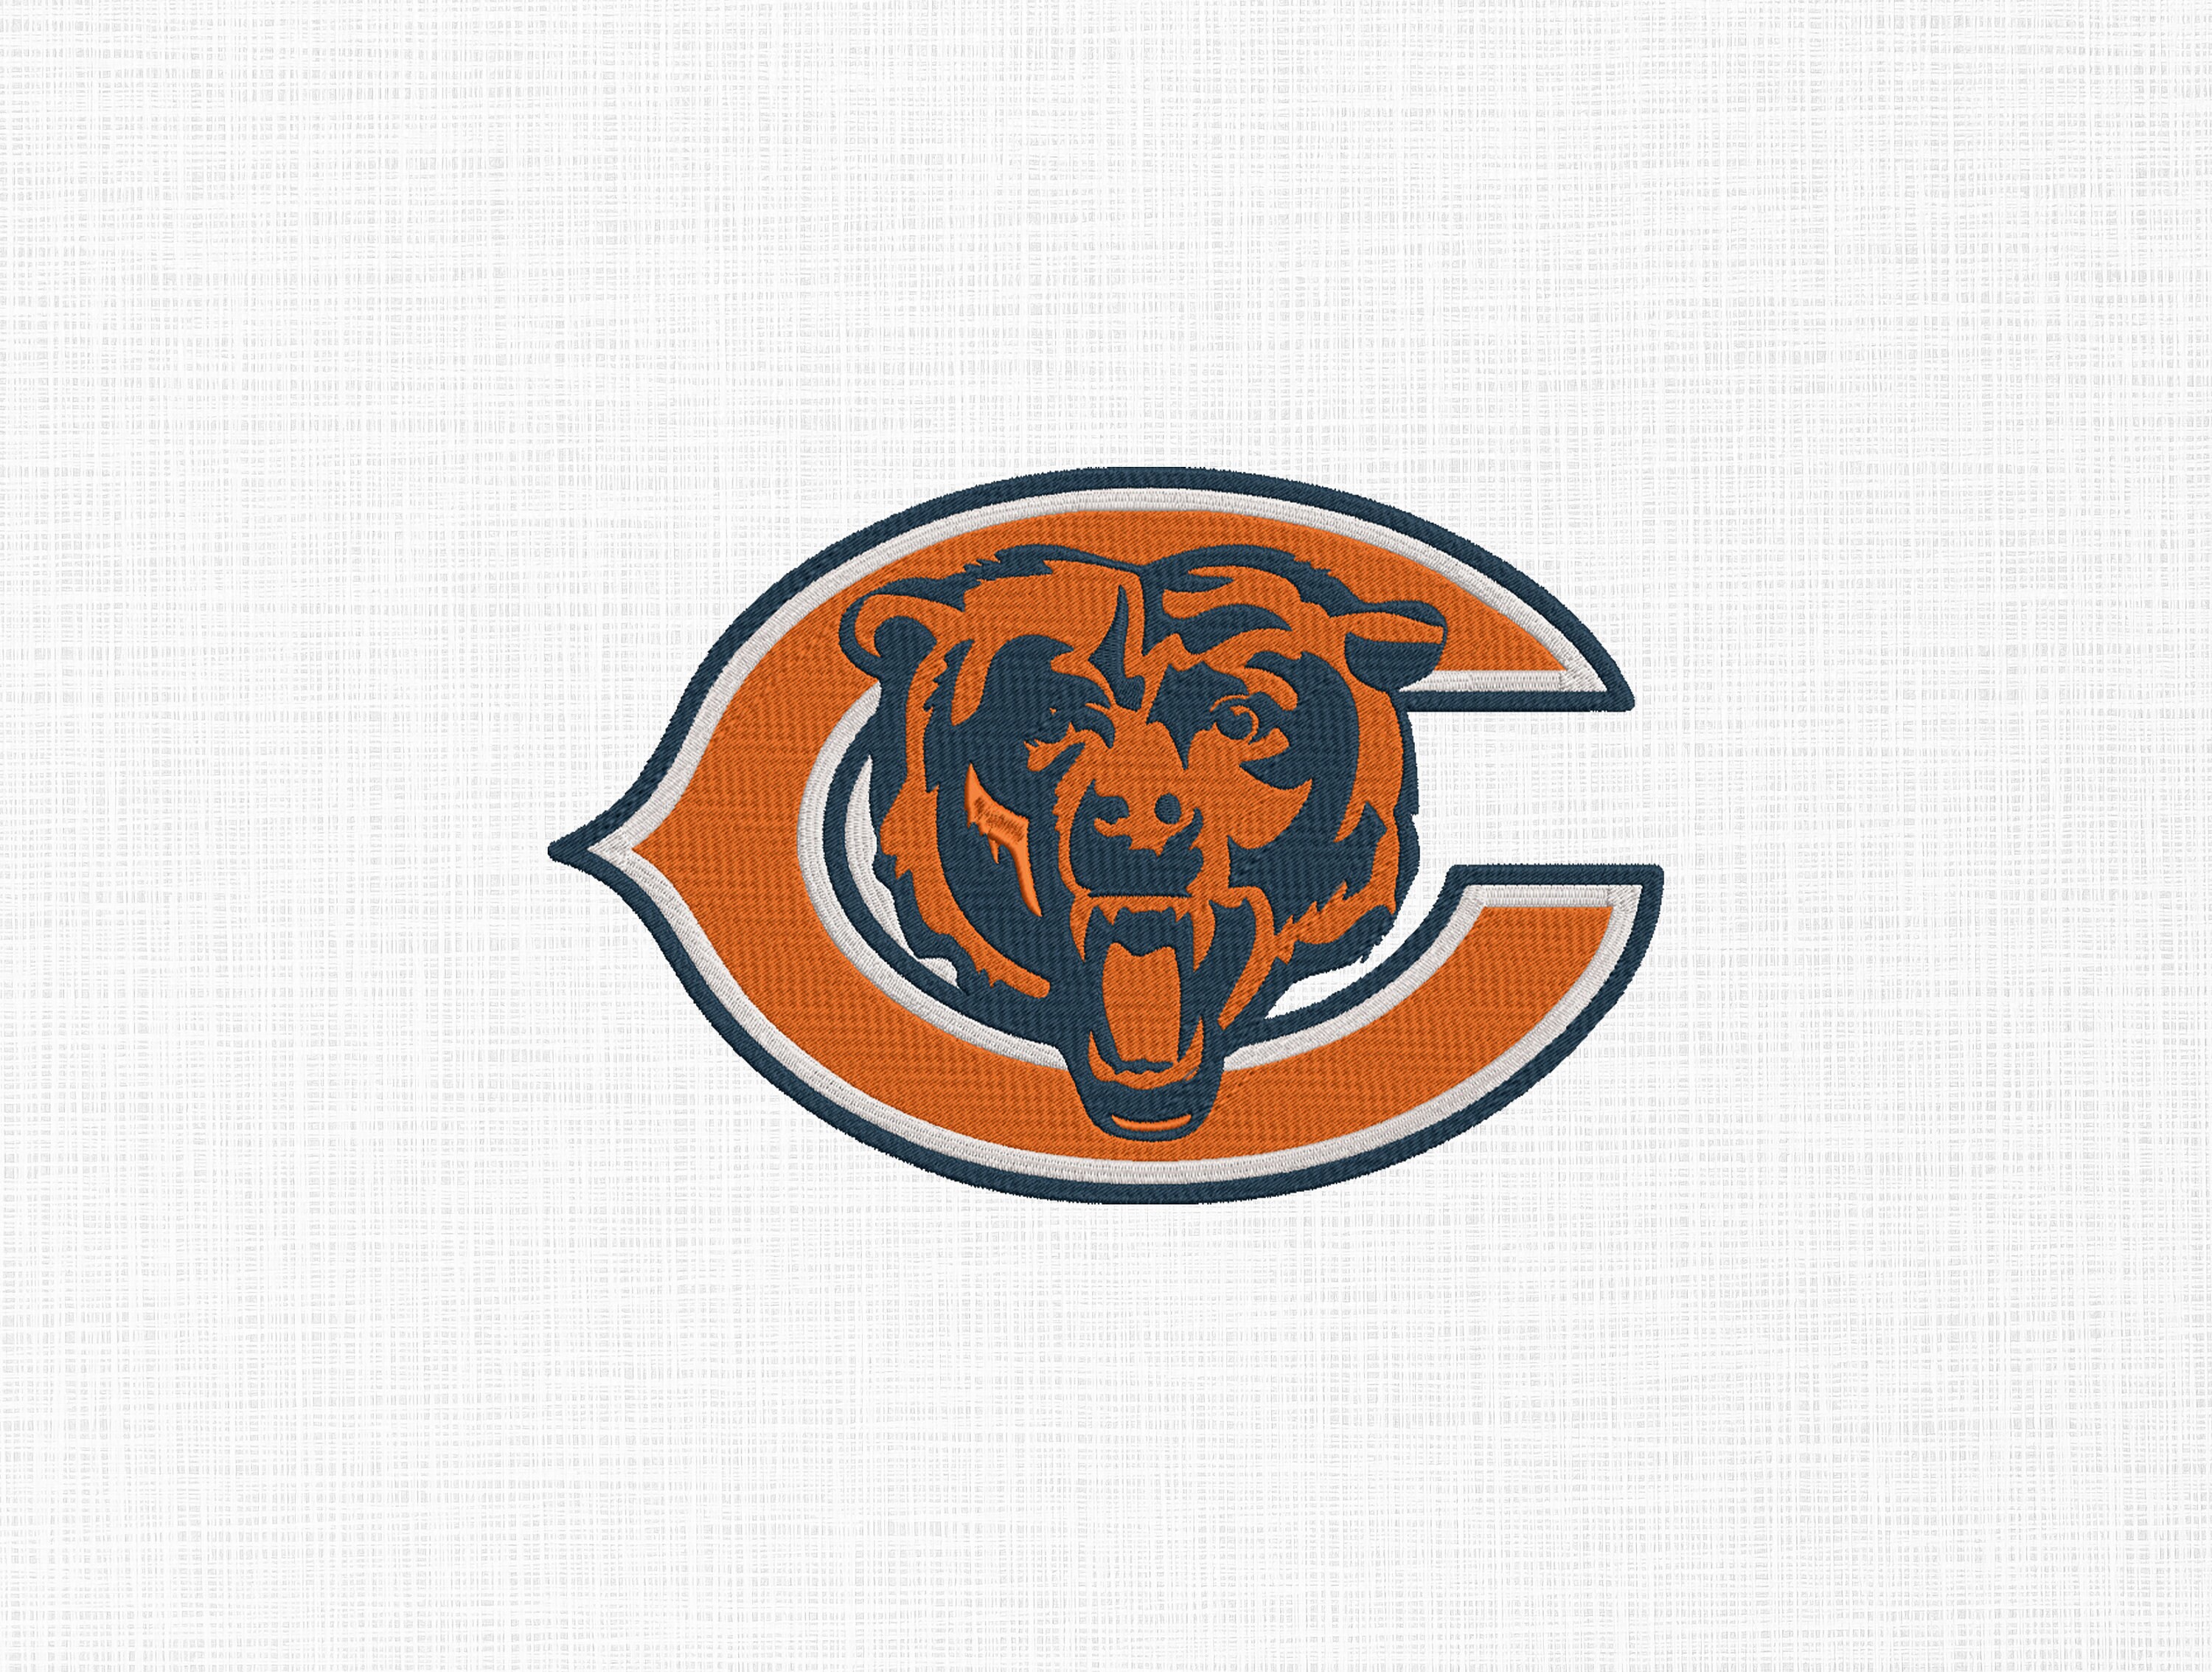 Chicago Bears Outline Embroidery Design ⋆ 6 sizes incl ⋆ Blu Cat Red Dog